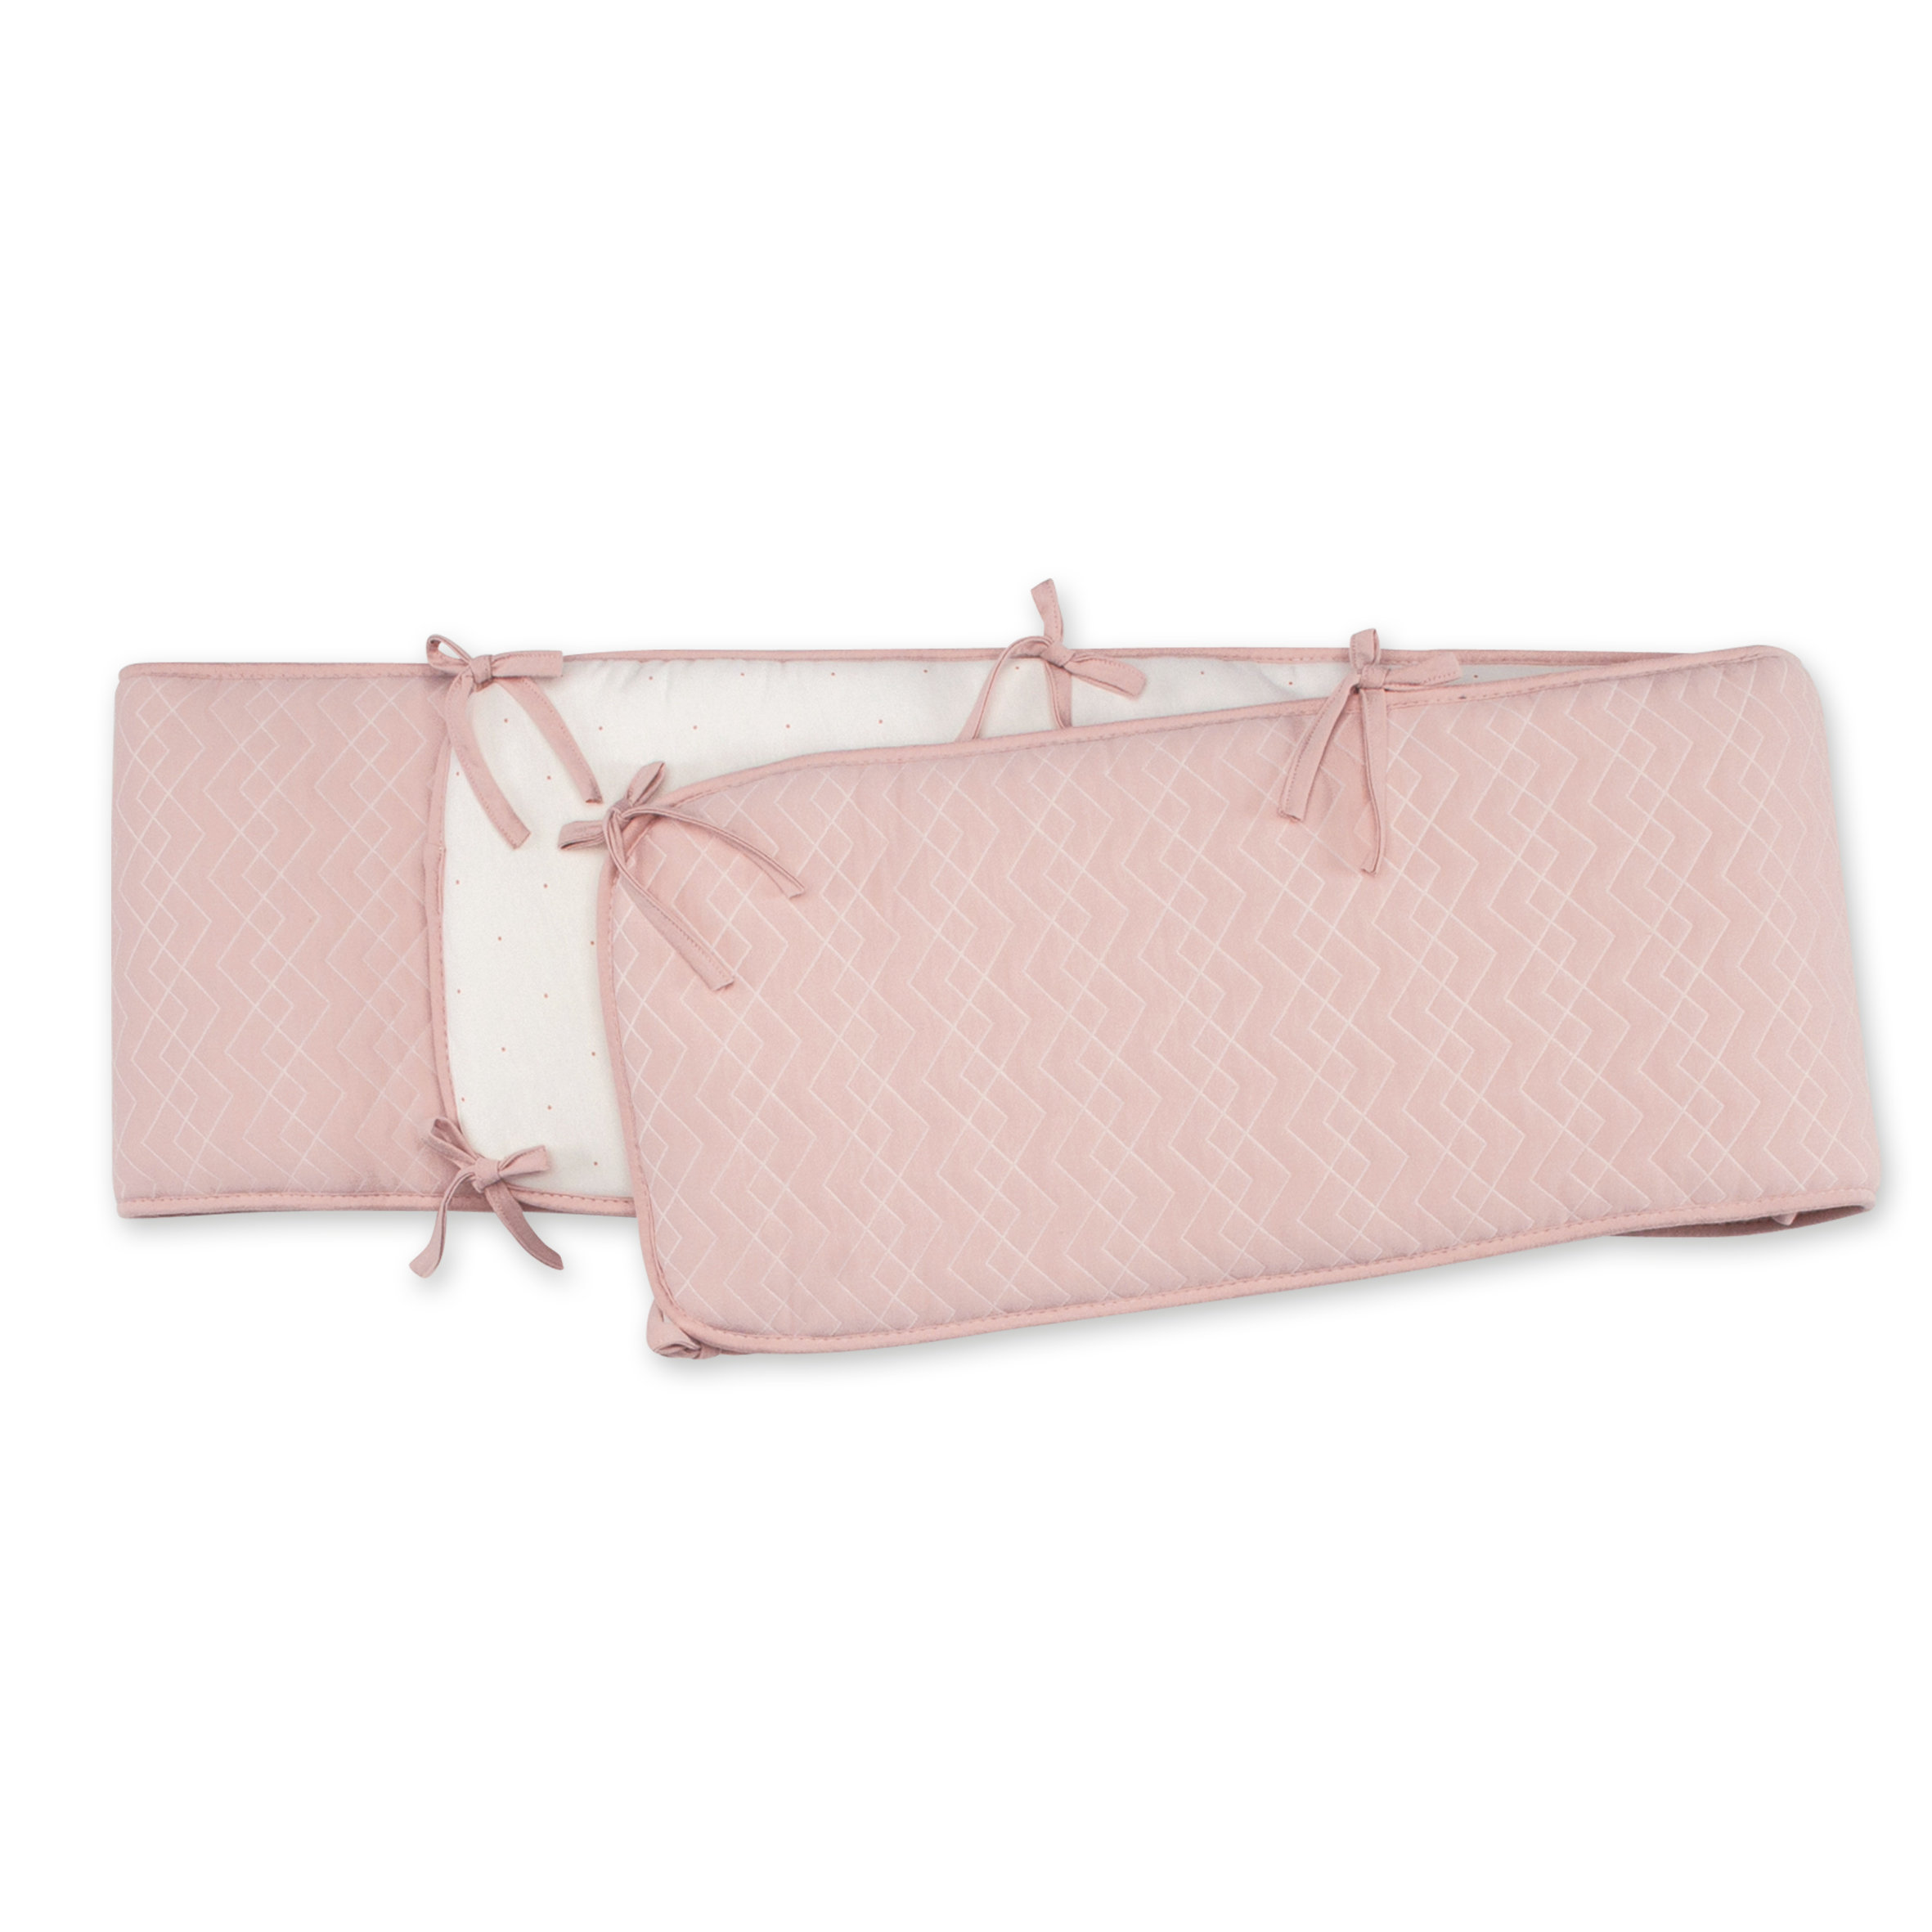 Protector de parque Pady quilted jersey + jersey 75x95x28cm OSAKA Blush